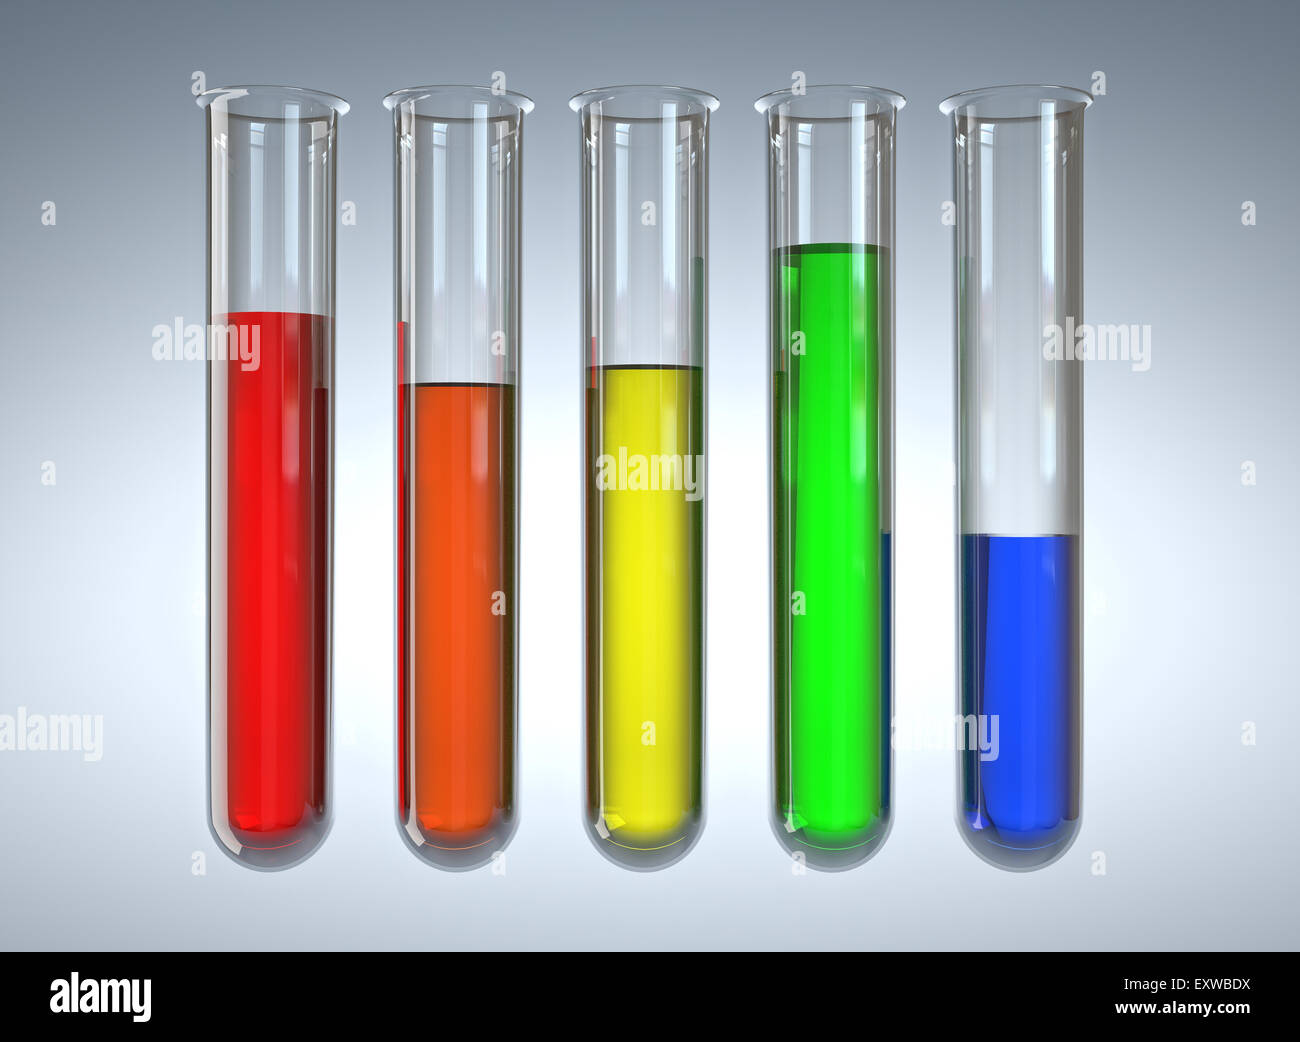 3d image of classic glass test tubes Stock Photo